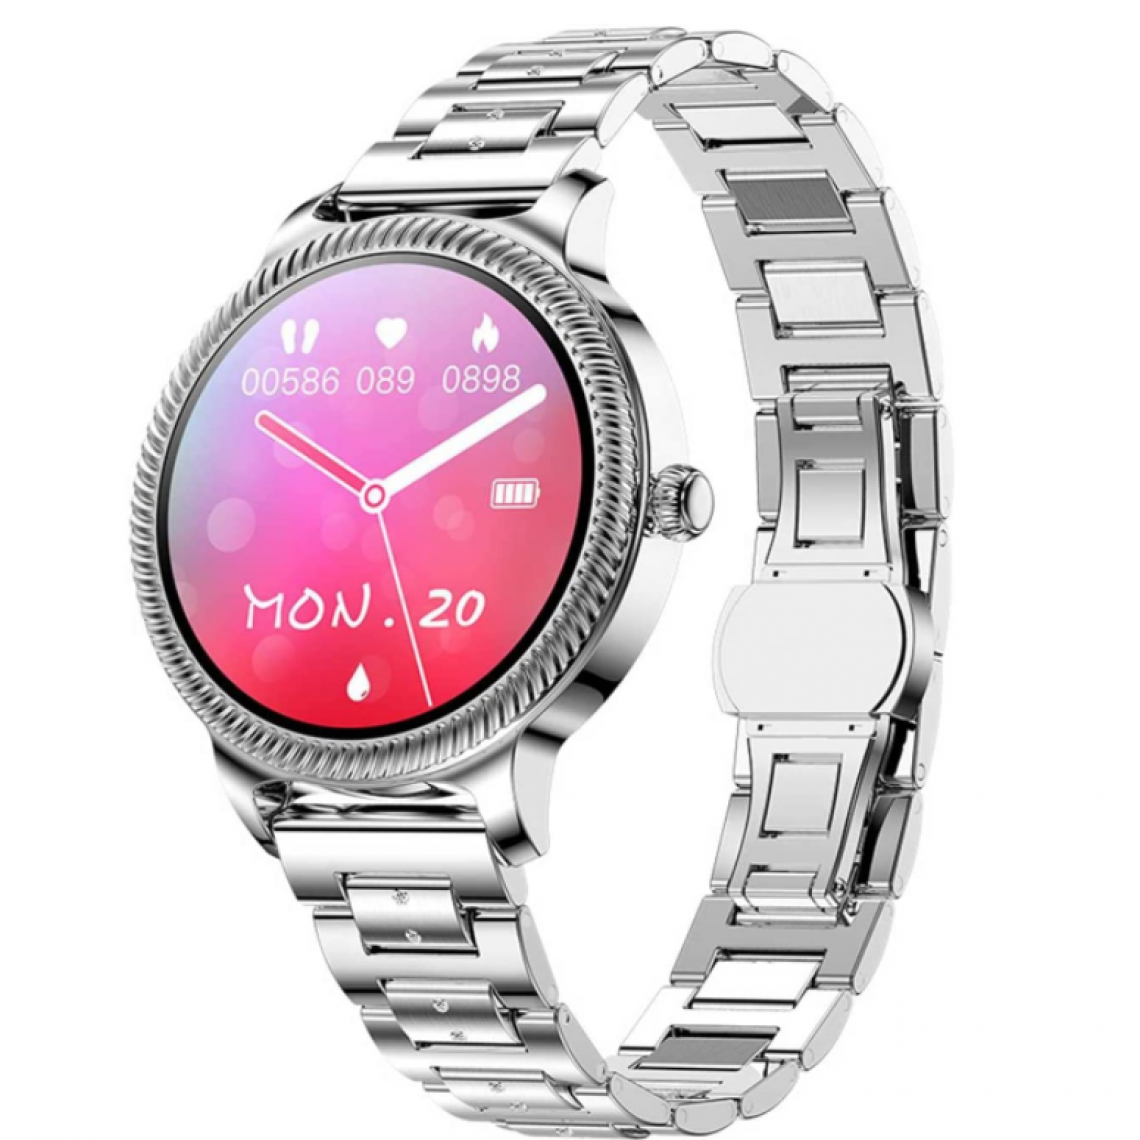 Chronotech Montres - Chronus Ladies Smart Watch Metal Strap Round HD Touch Screen Bluetooth Music Player Sleep Monitoring IP68 Waterproof (Silver) - Montre connectée